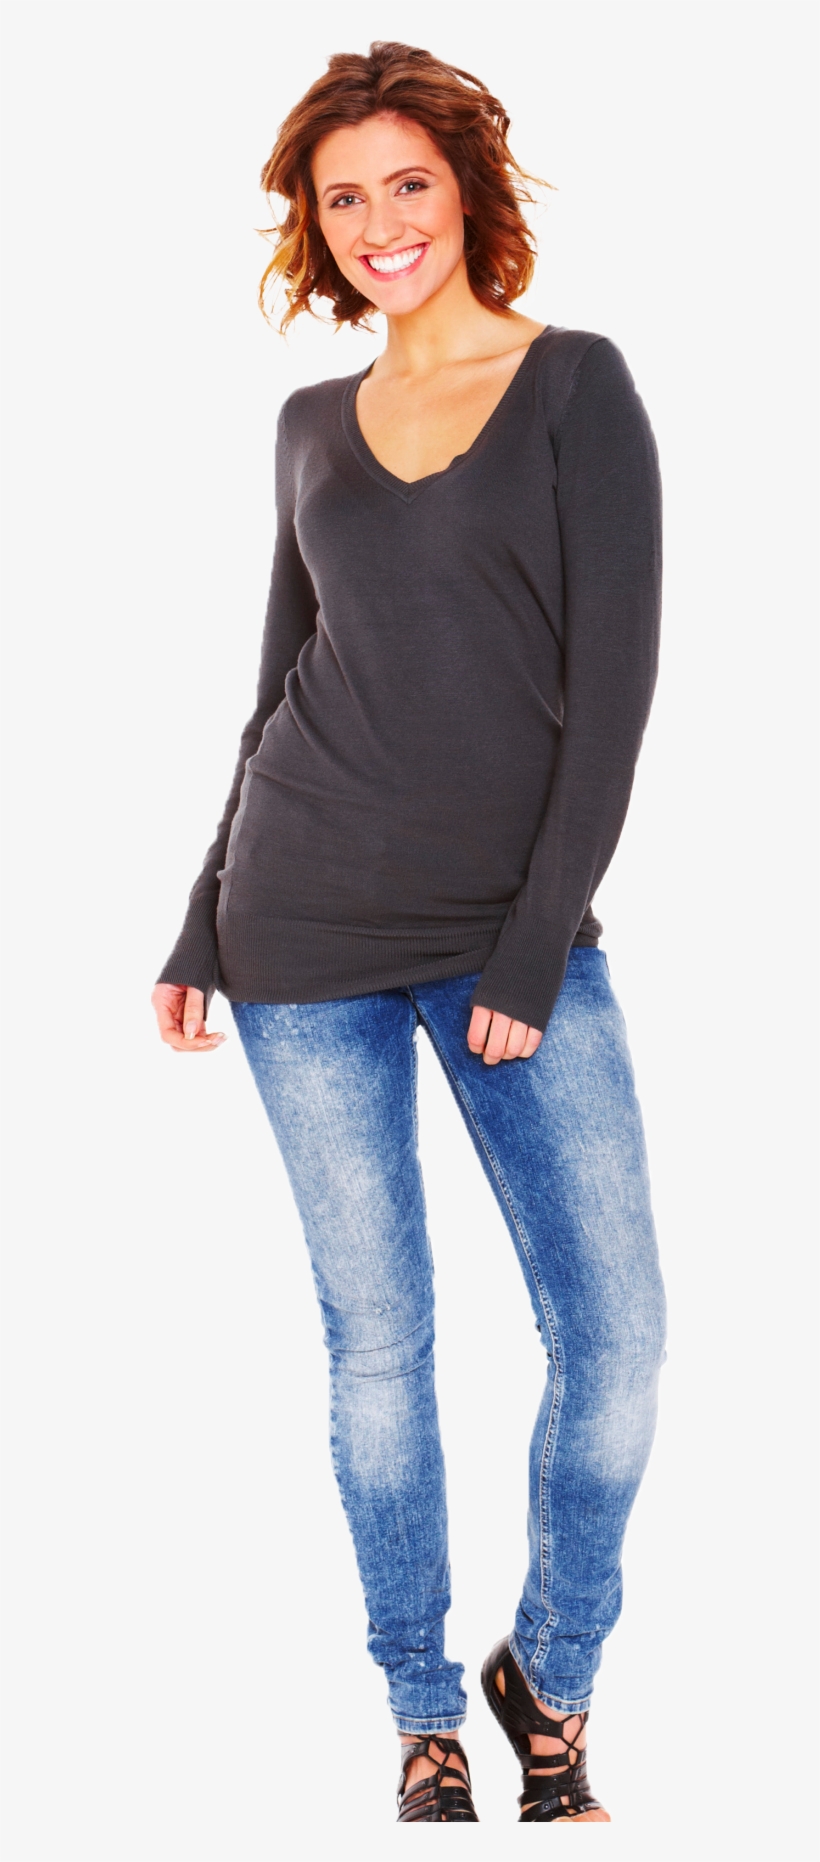 Photoshop - Woman In Jeans Png, transparent png #1501791